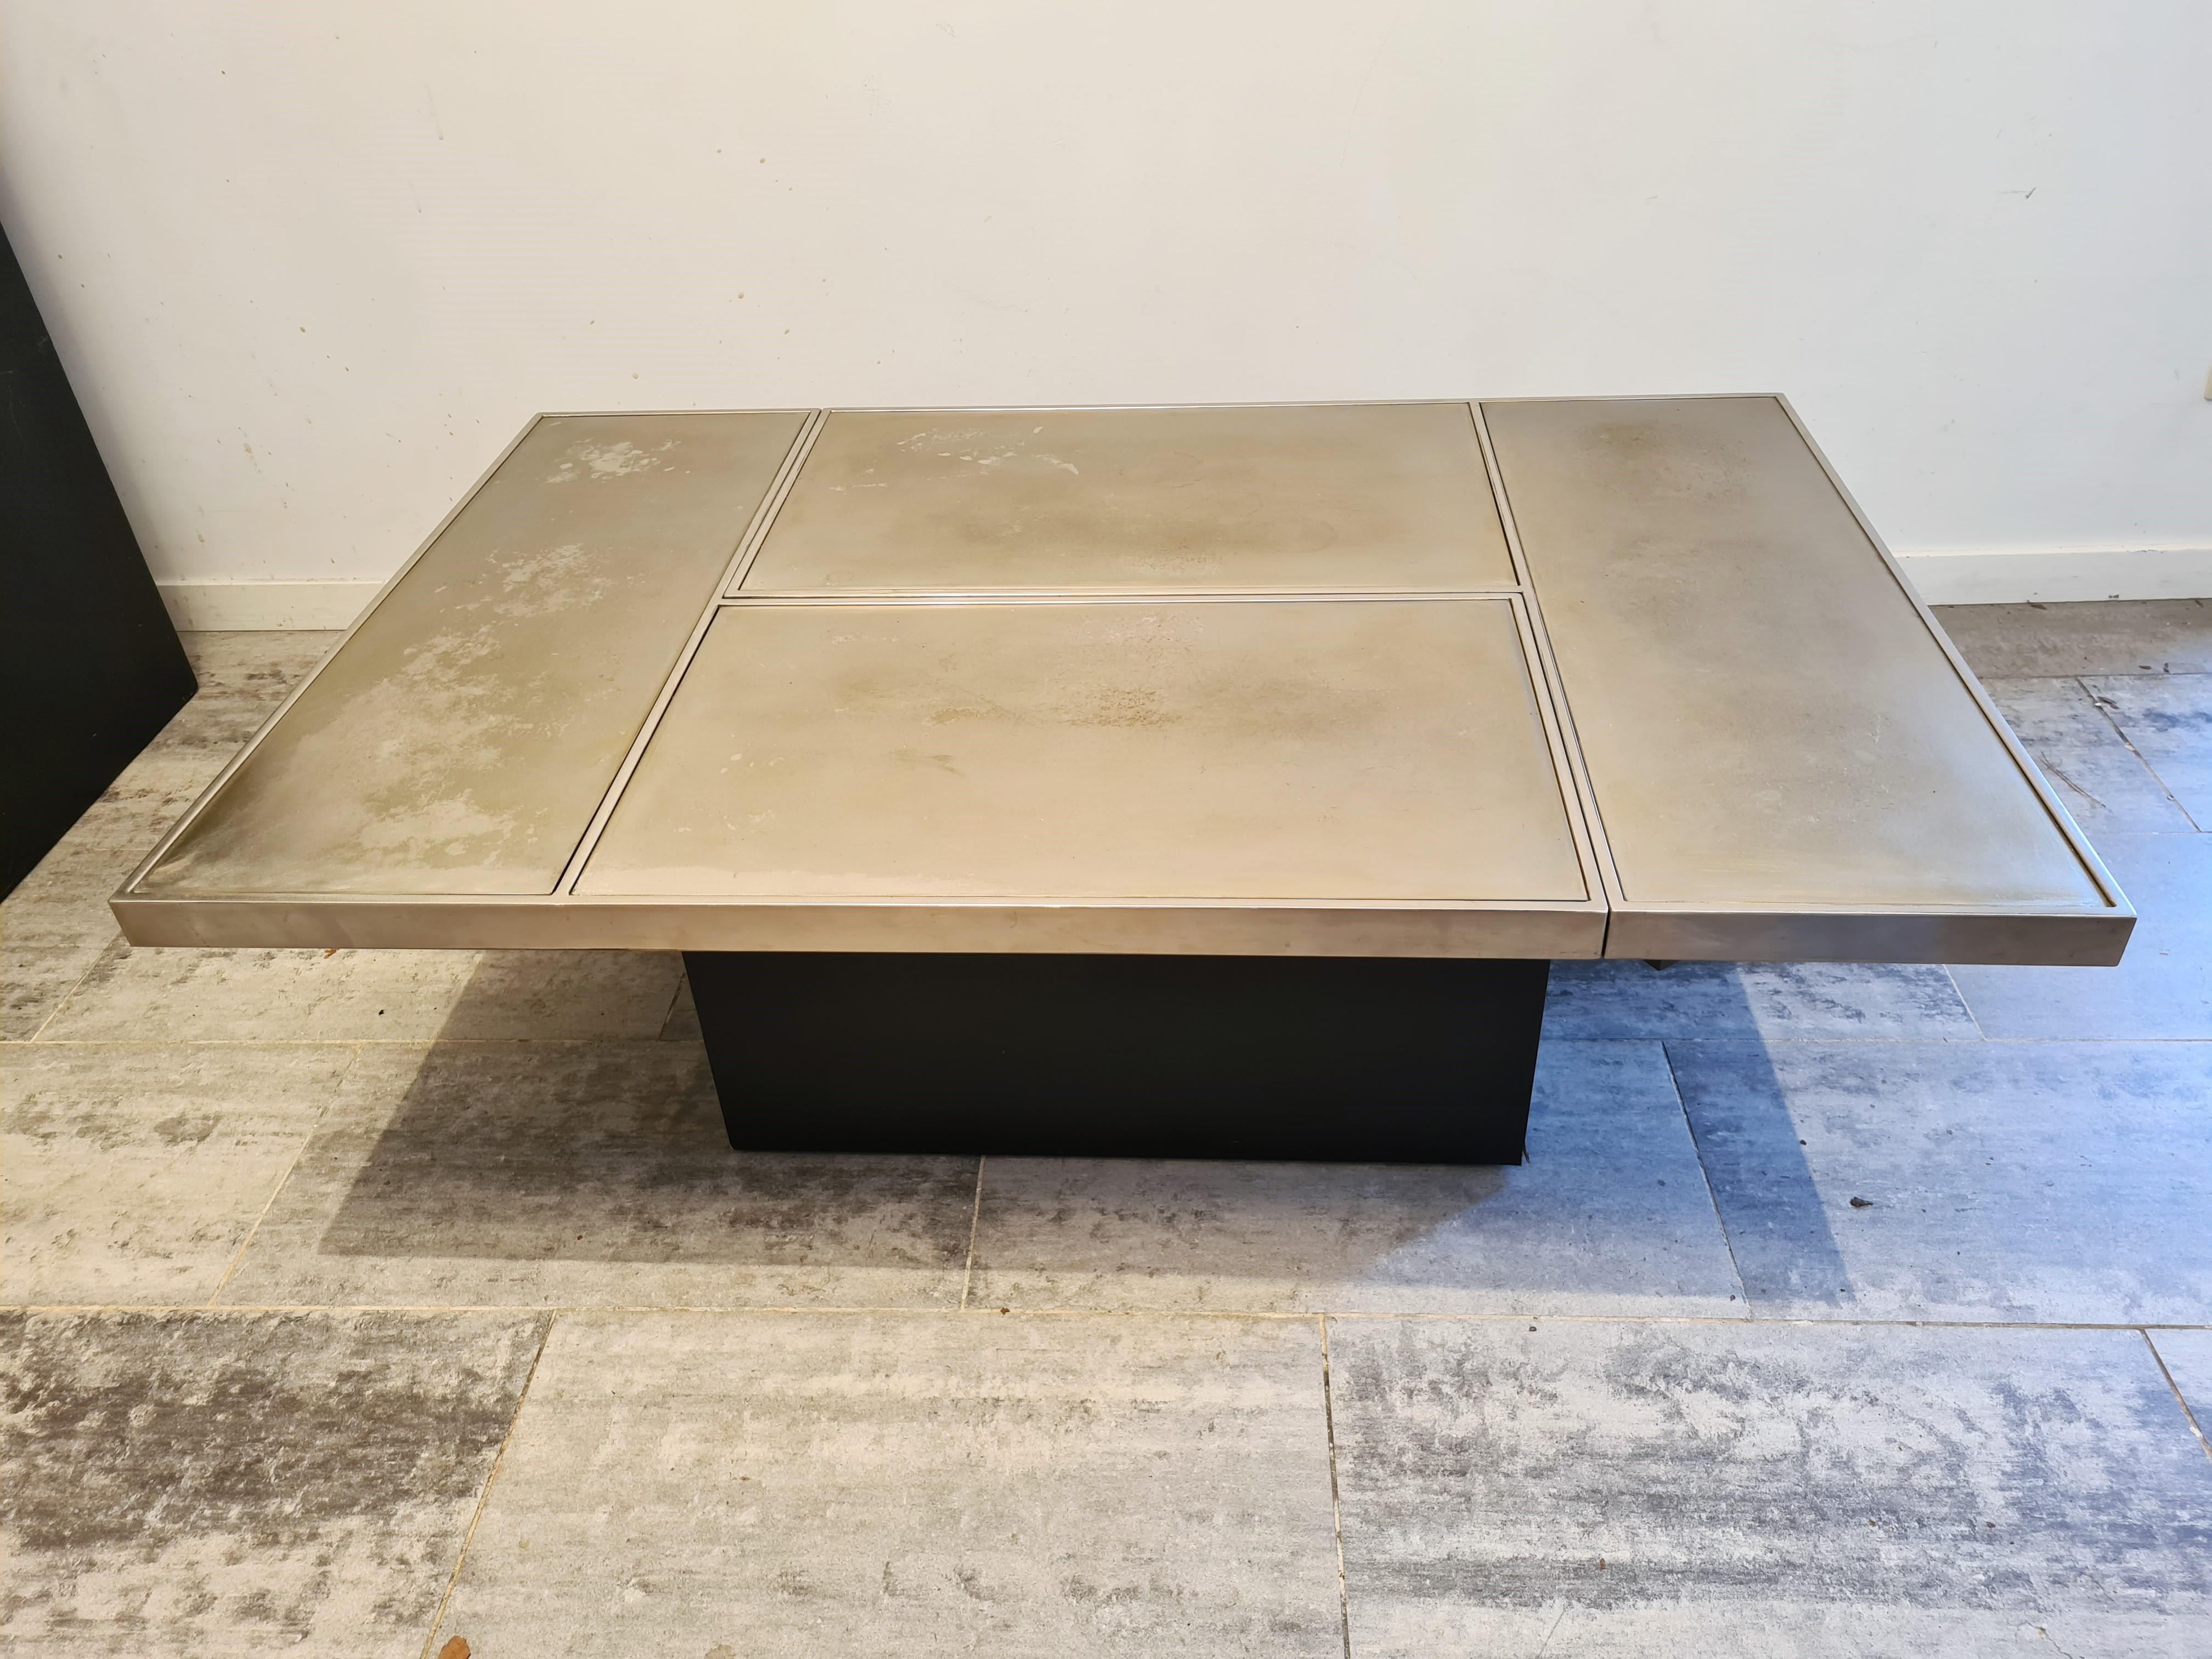 Hidden bar coffee table by Willy Rizzo.

This coffee table consists of two brass pivoting parts that open up to showcase a mirrored bar compartment.

Condition: The brass is worn in some spots but still has a good overall look.

1970s -